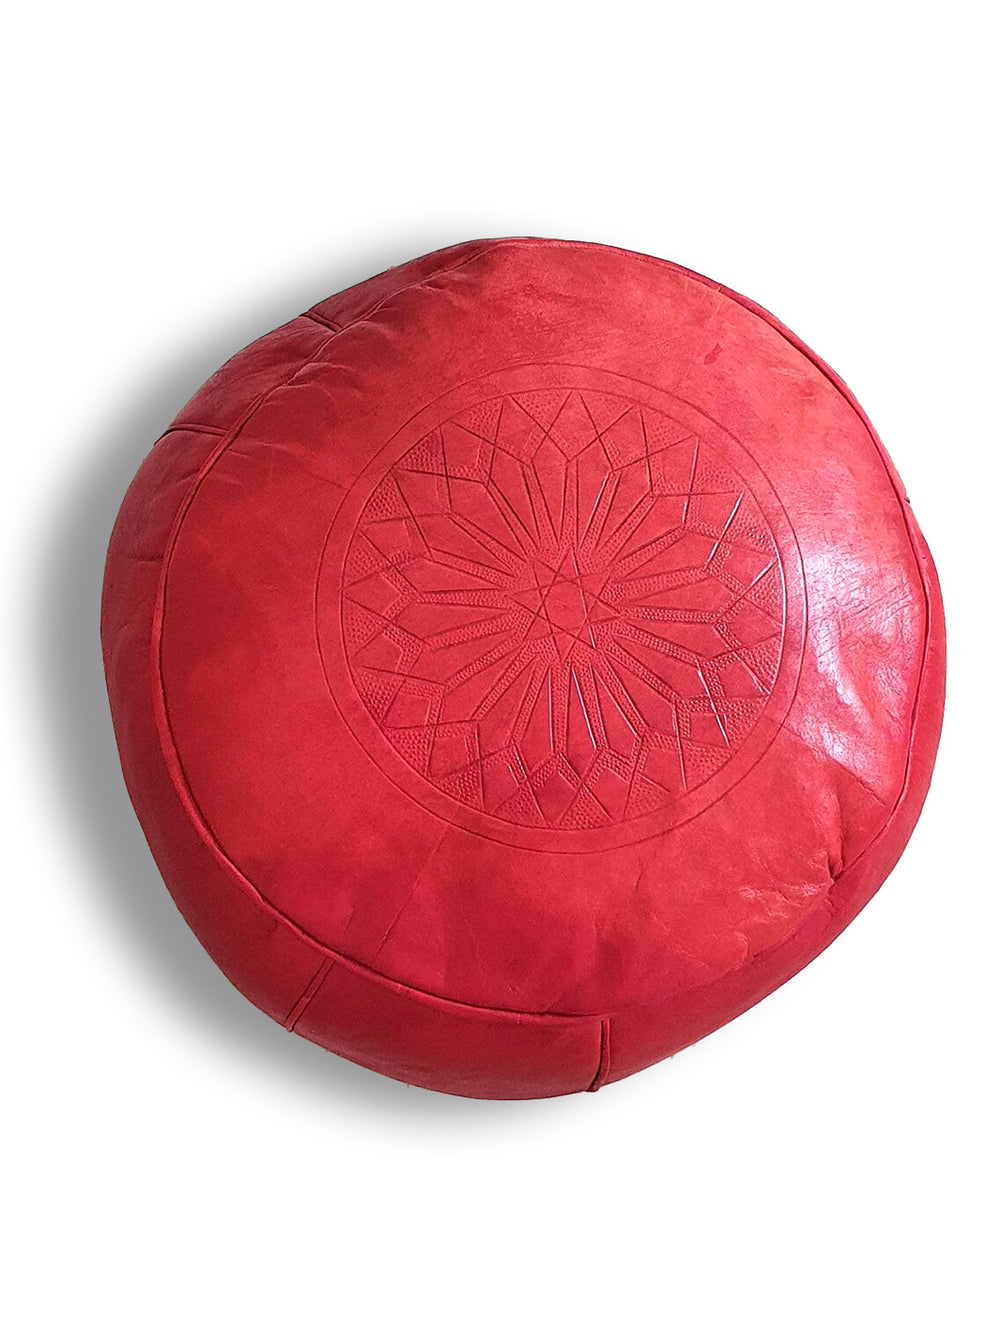 Handcrafted Red or Blue Moroccan Leather Pouf Libitii Poufs LIB-0187-1